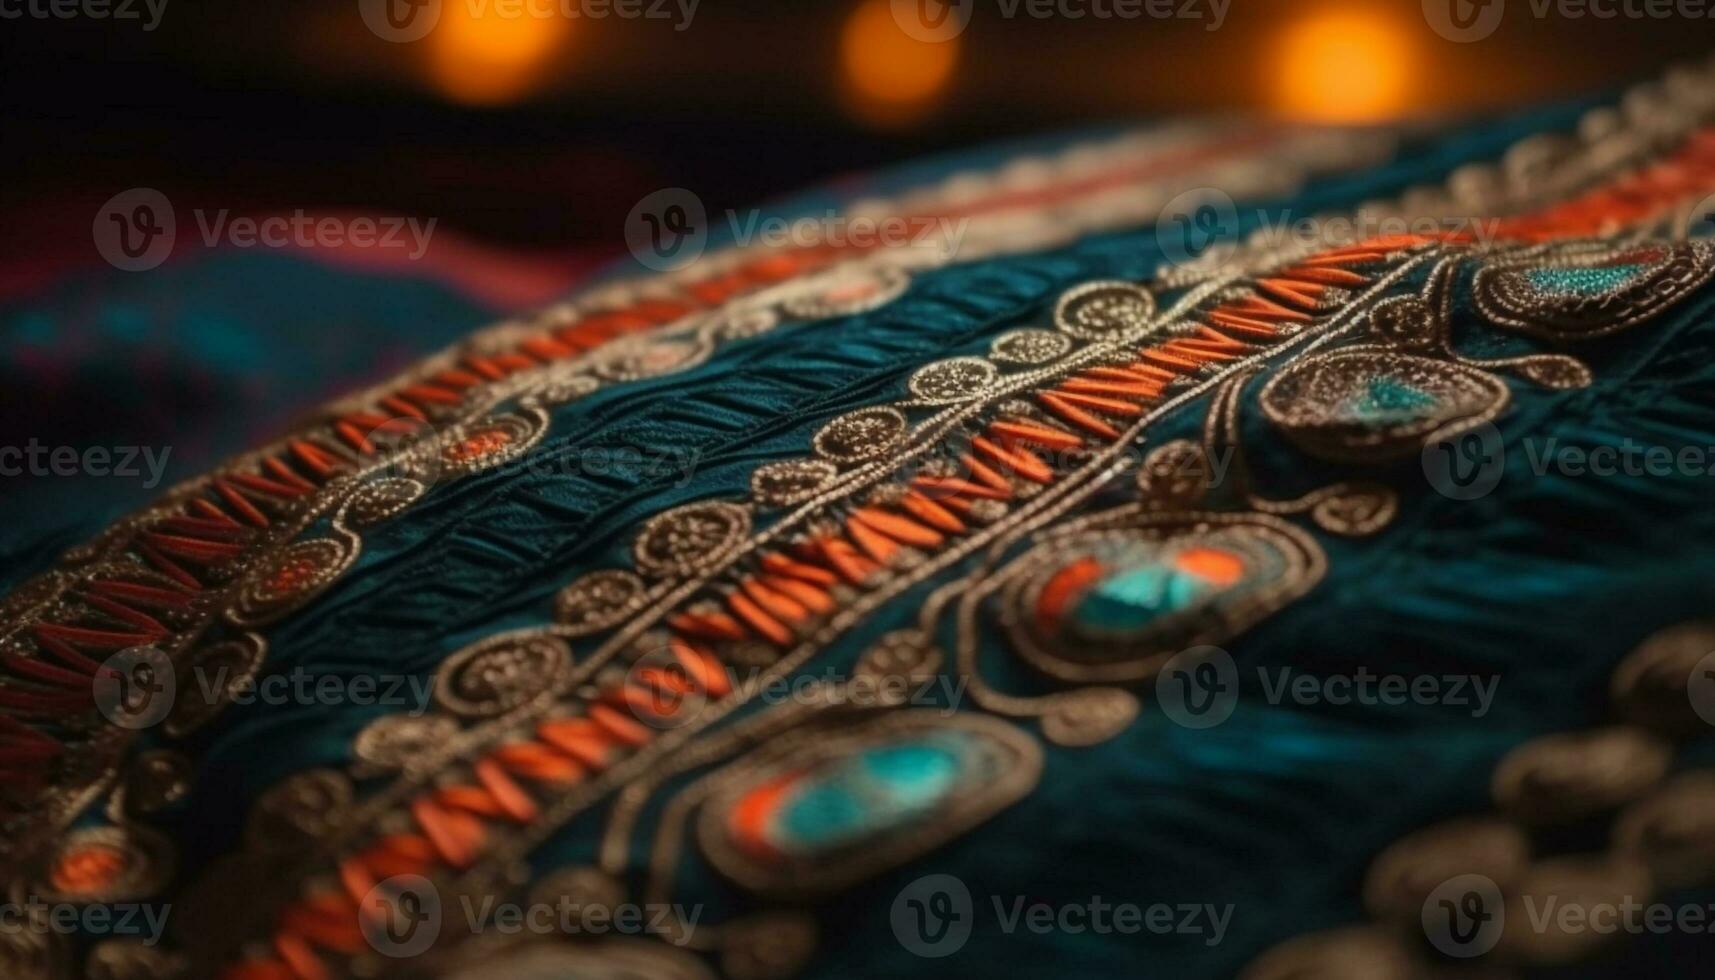 Woven wool rug, ornate embroidery, vibrant colors generated by AI photo